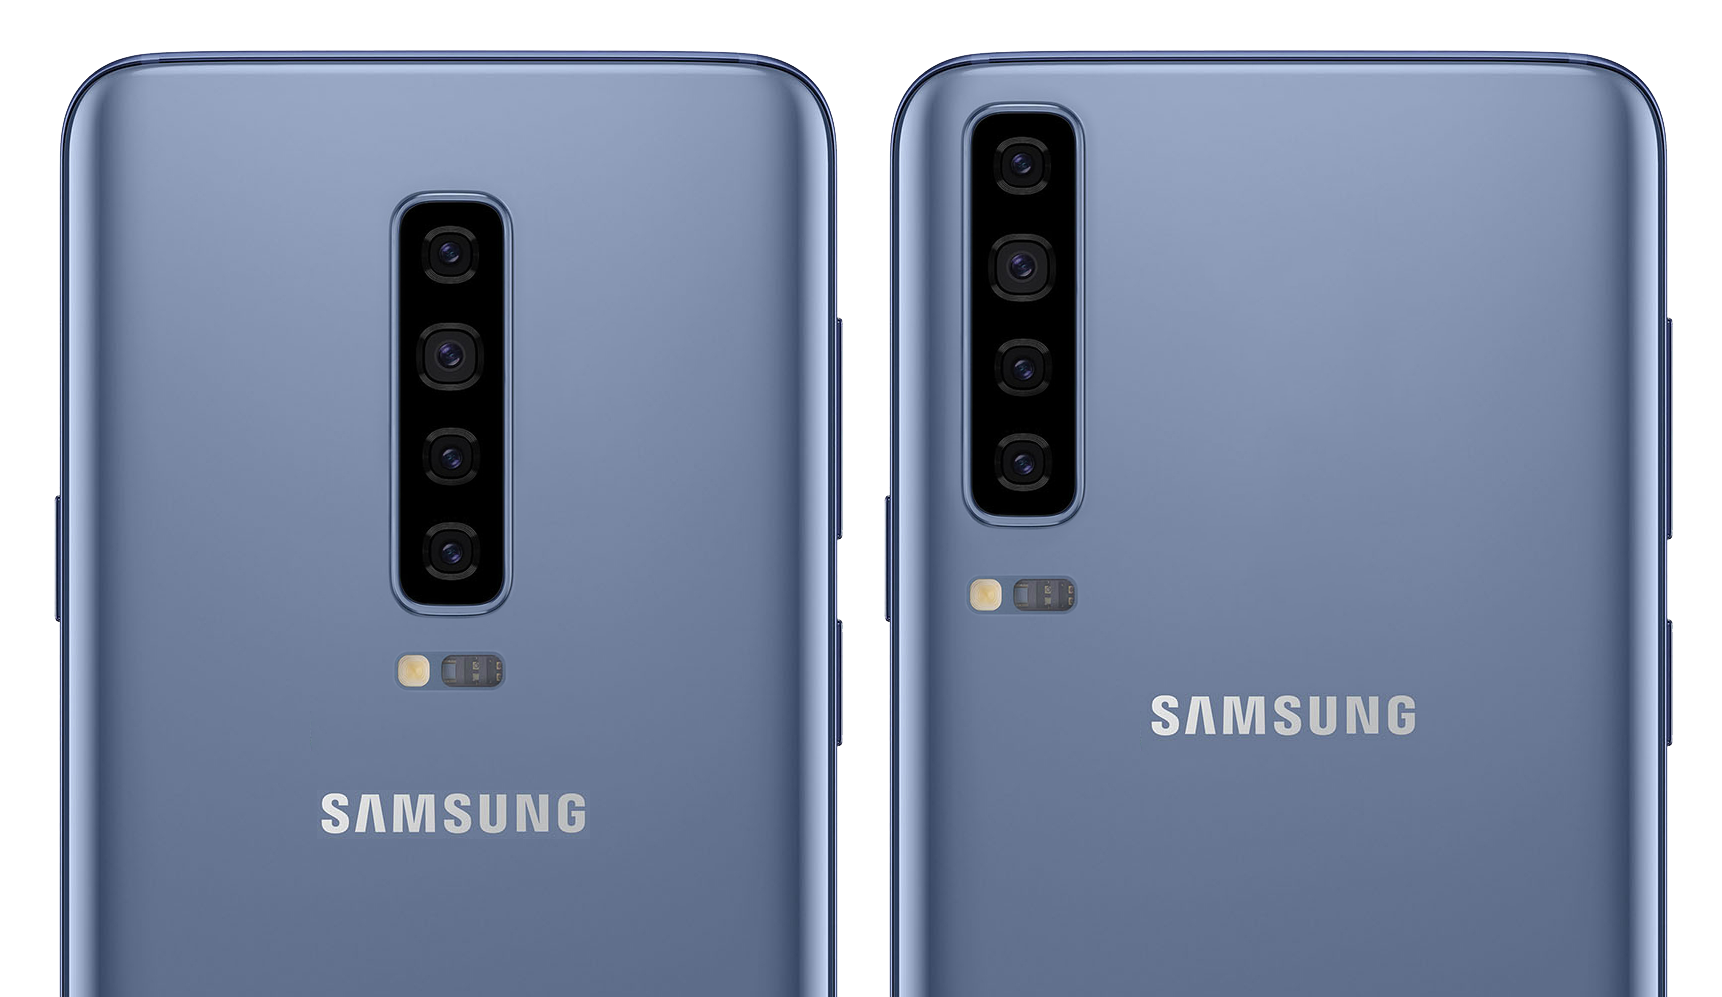 Samsung developing top-tier Galaxy S10 variant with 5G support and six cameras